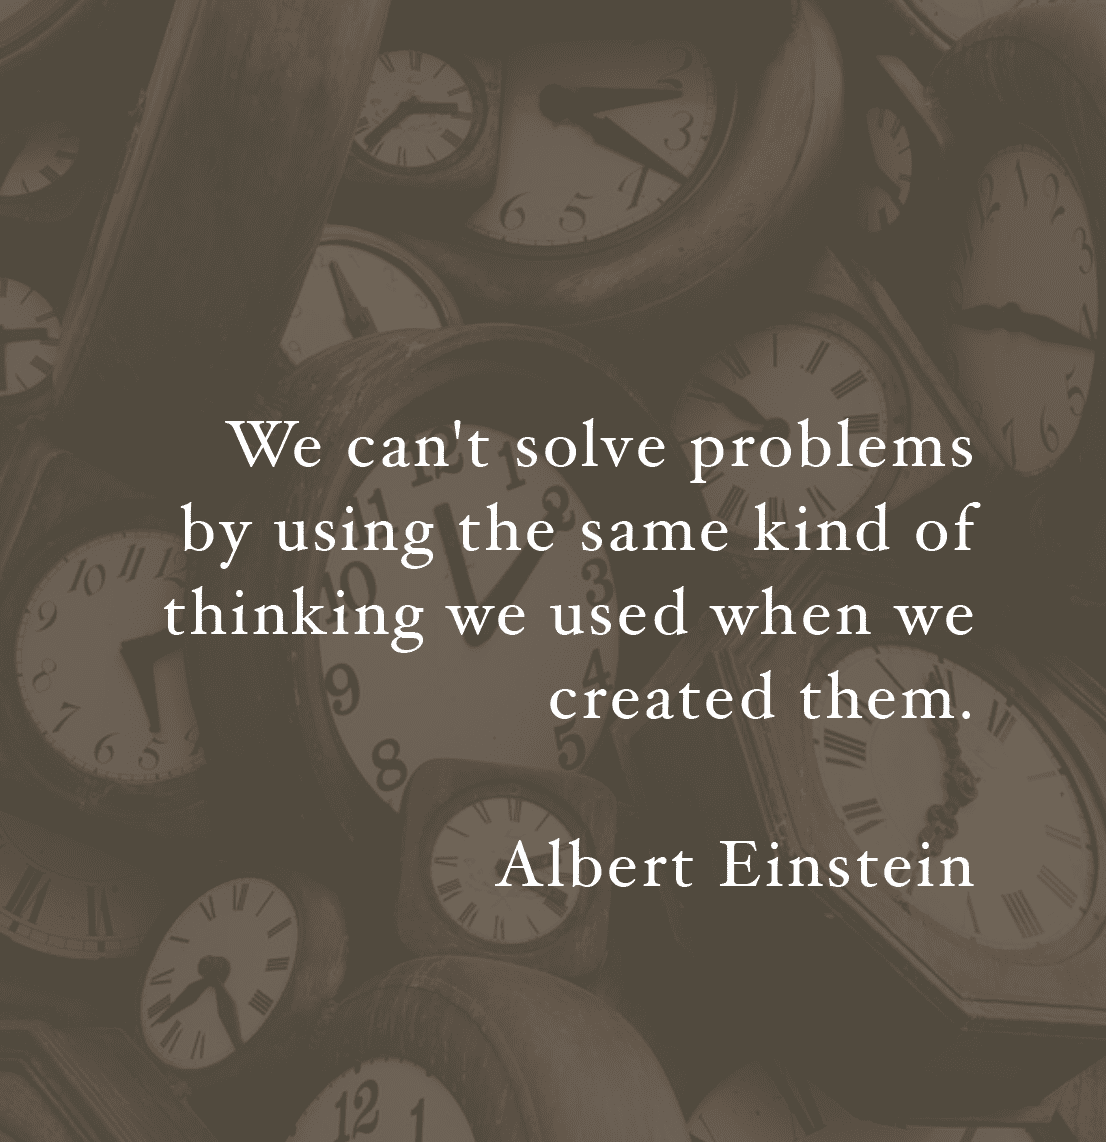 We cant solve problems by using the same kind of thinking we used when we created them. Albert Einstein